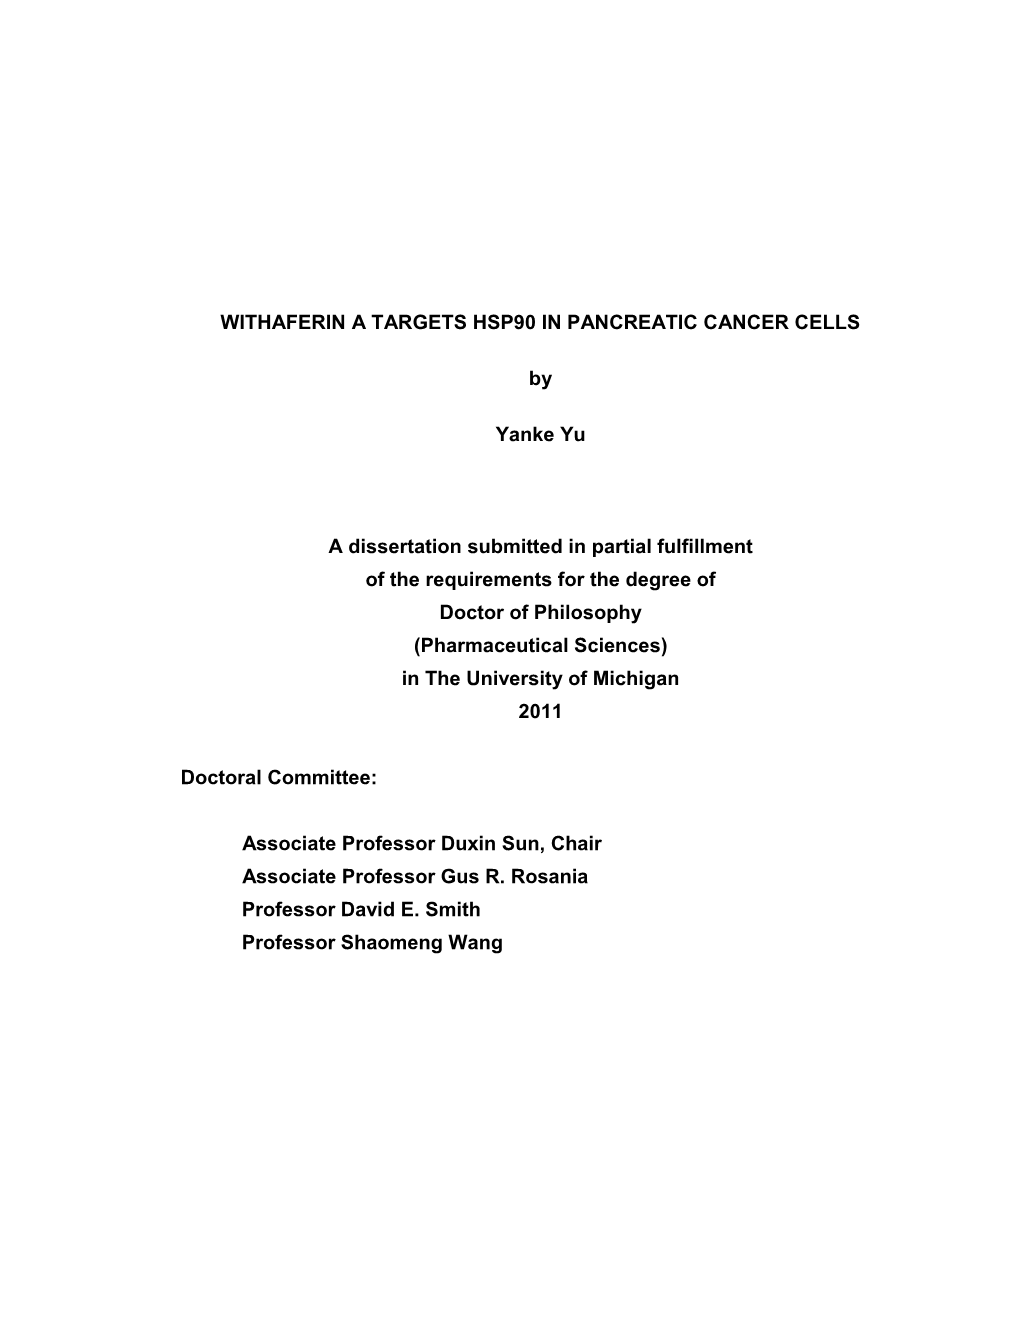 WITHAFERIN a TARGETS HSP90 in PANCREATIC CANCER CELLS by Yanke Yu a Dissertation Submitted in Partial Fulfillment of the Requir